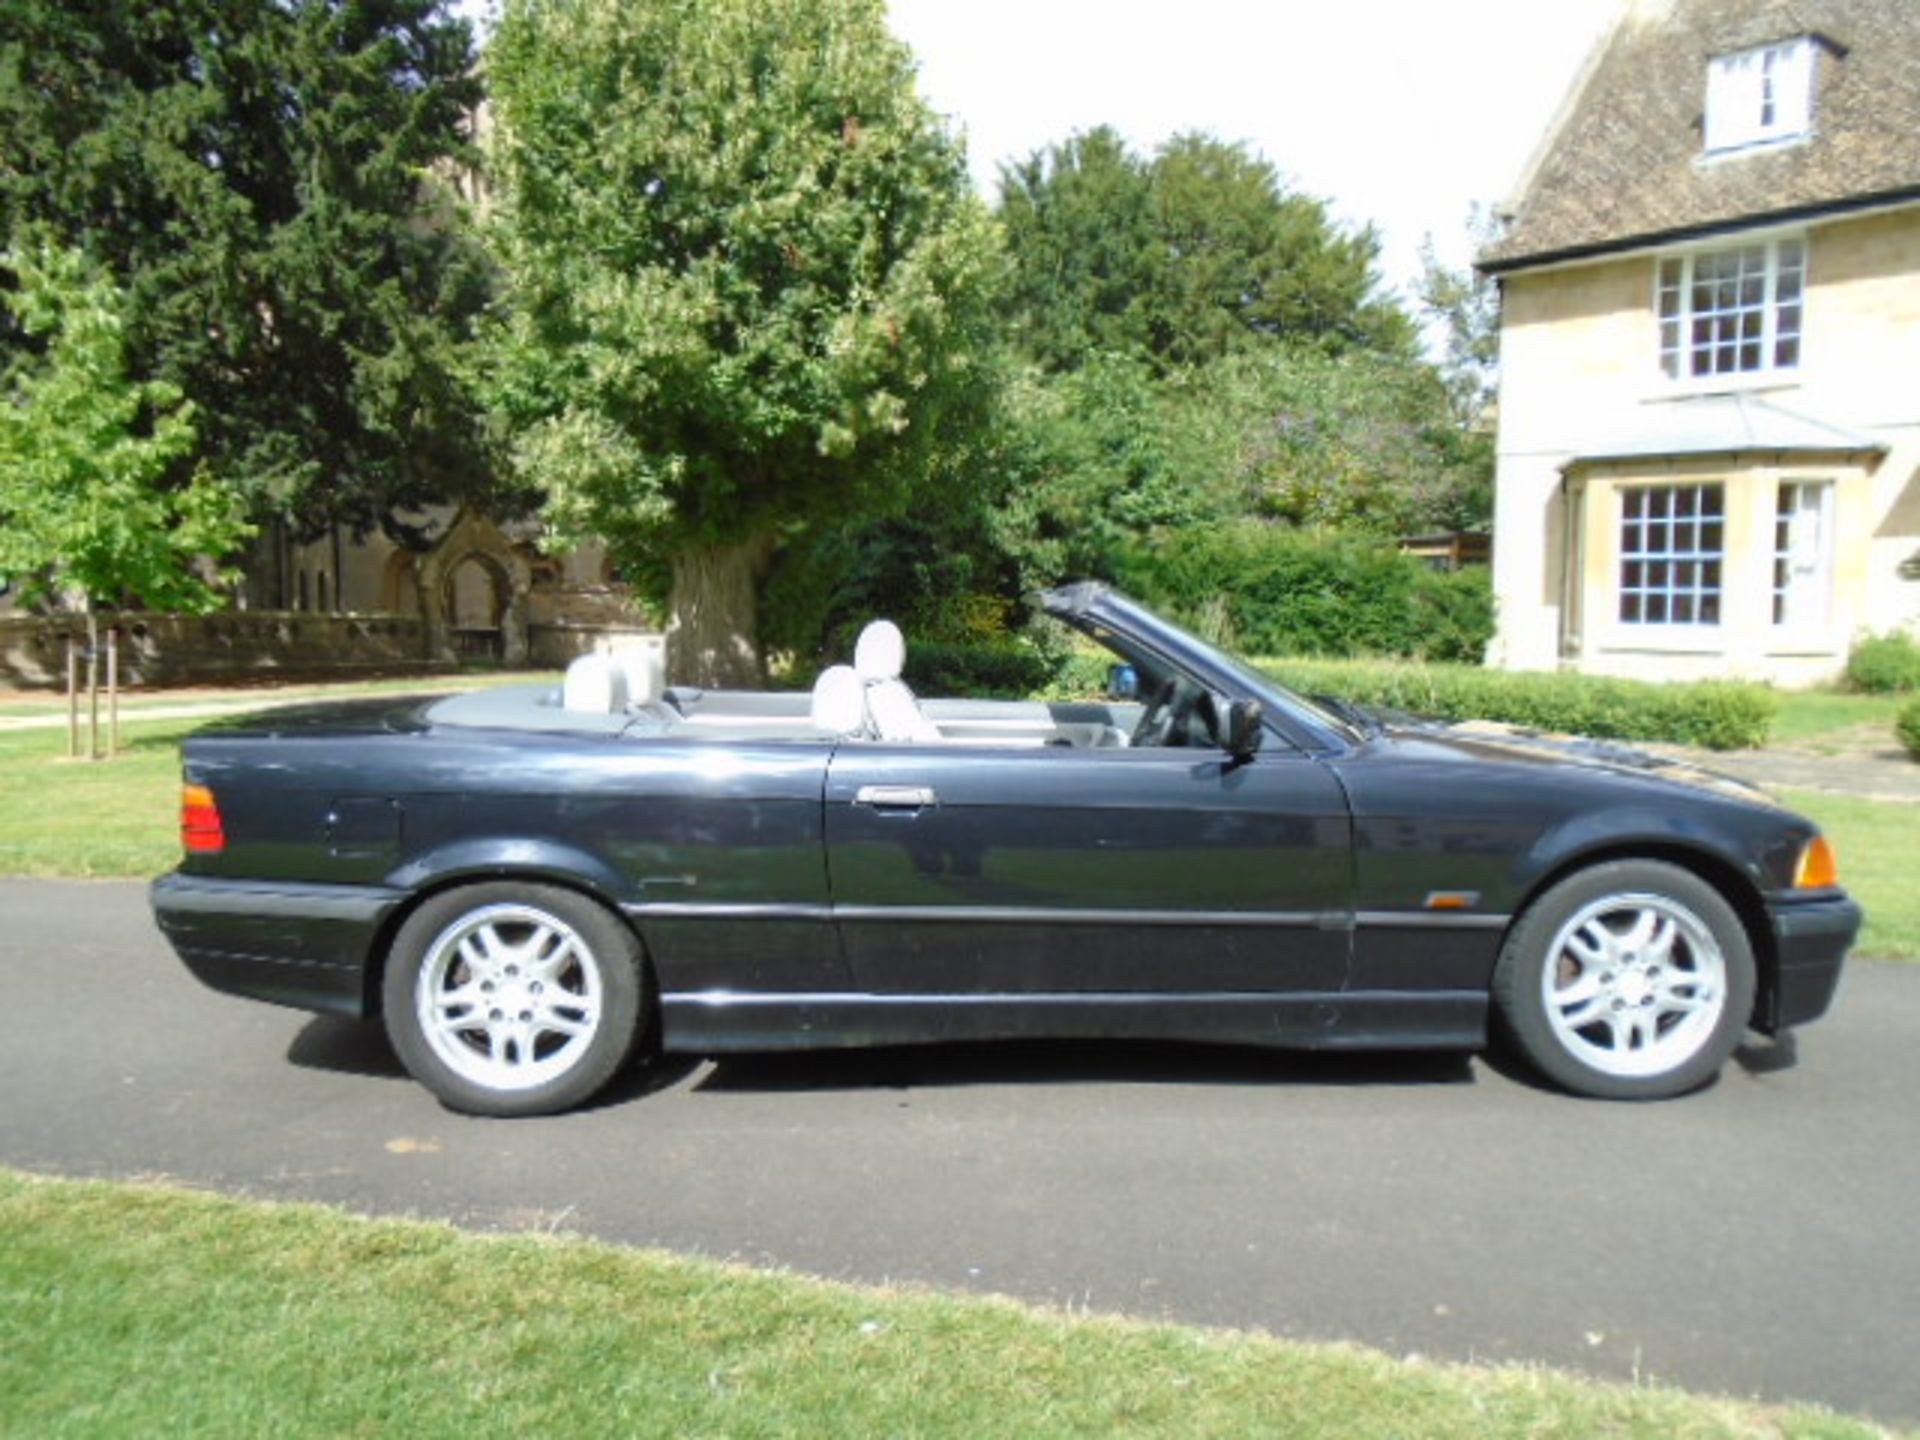 1995 BMW 328i Convertible - Image 6 of 15